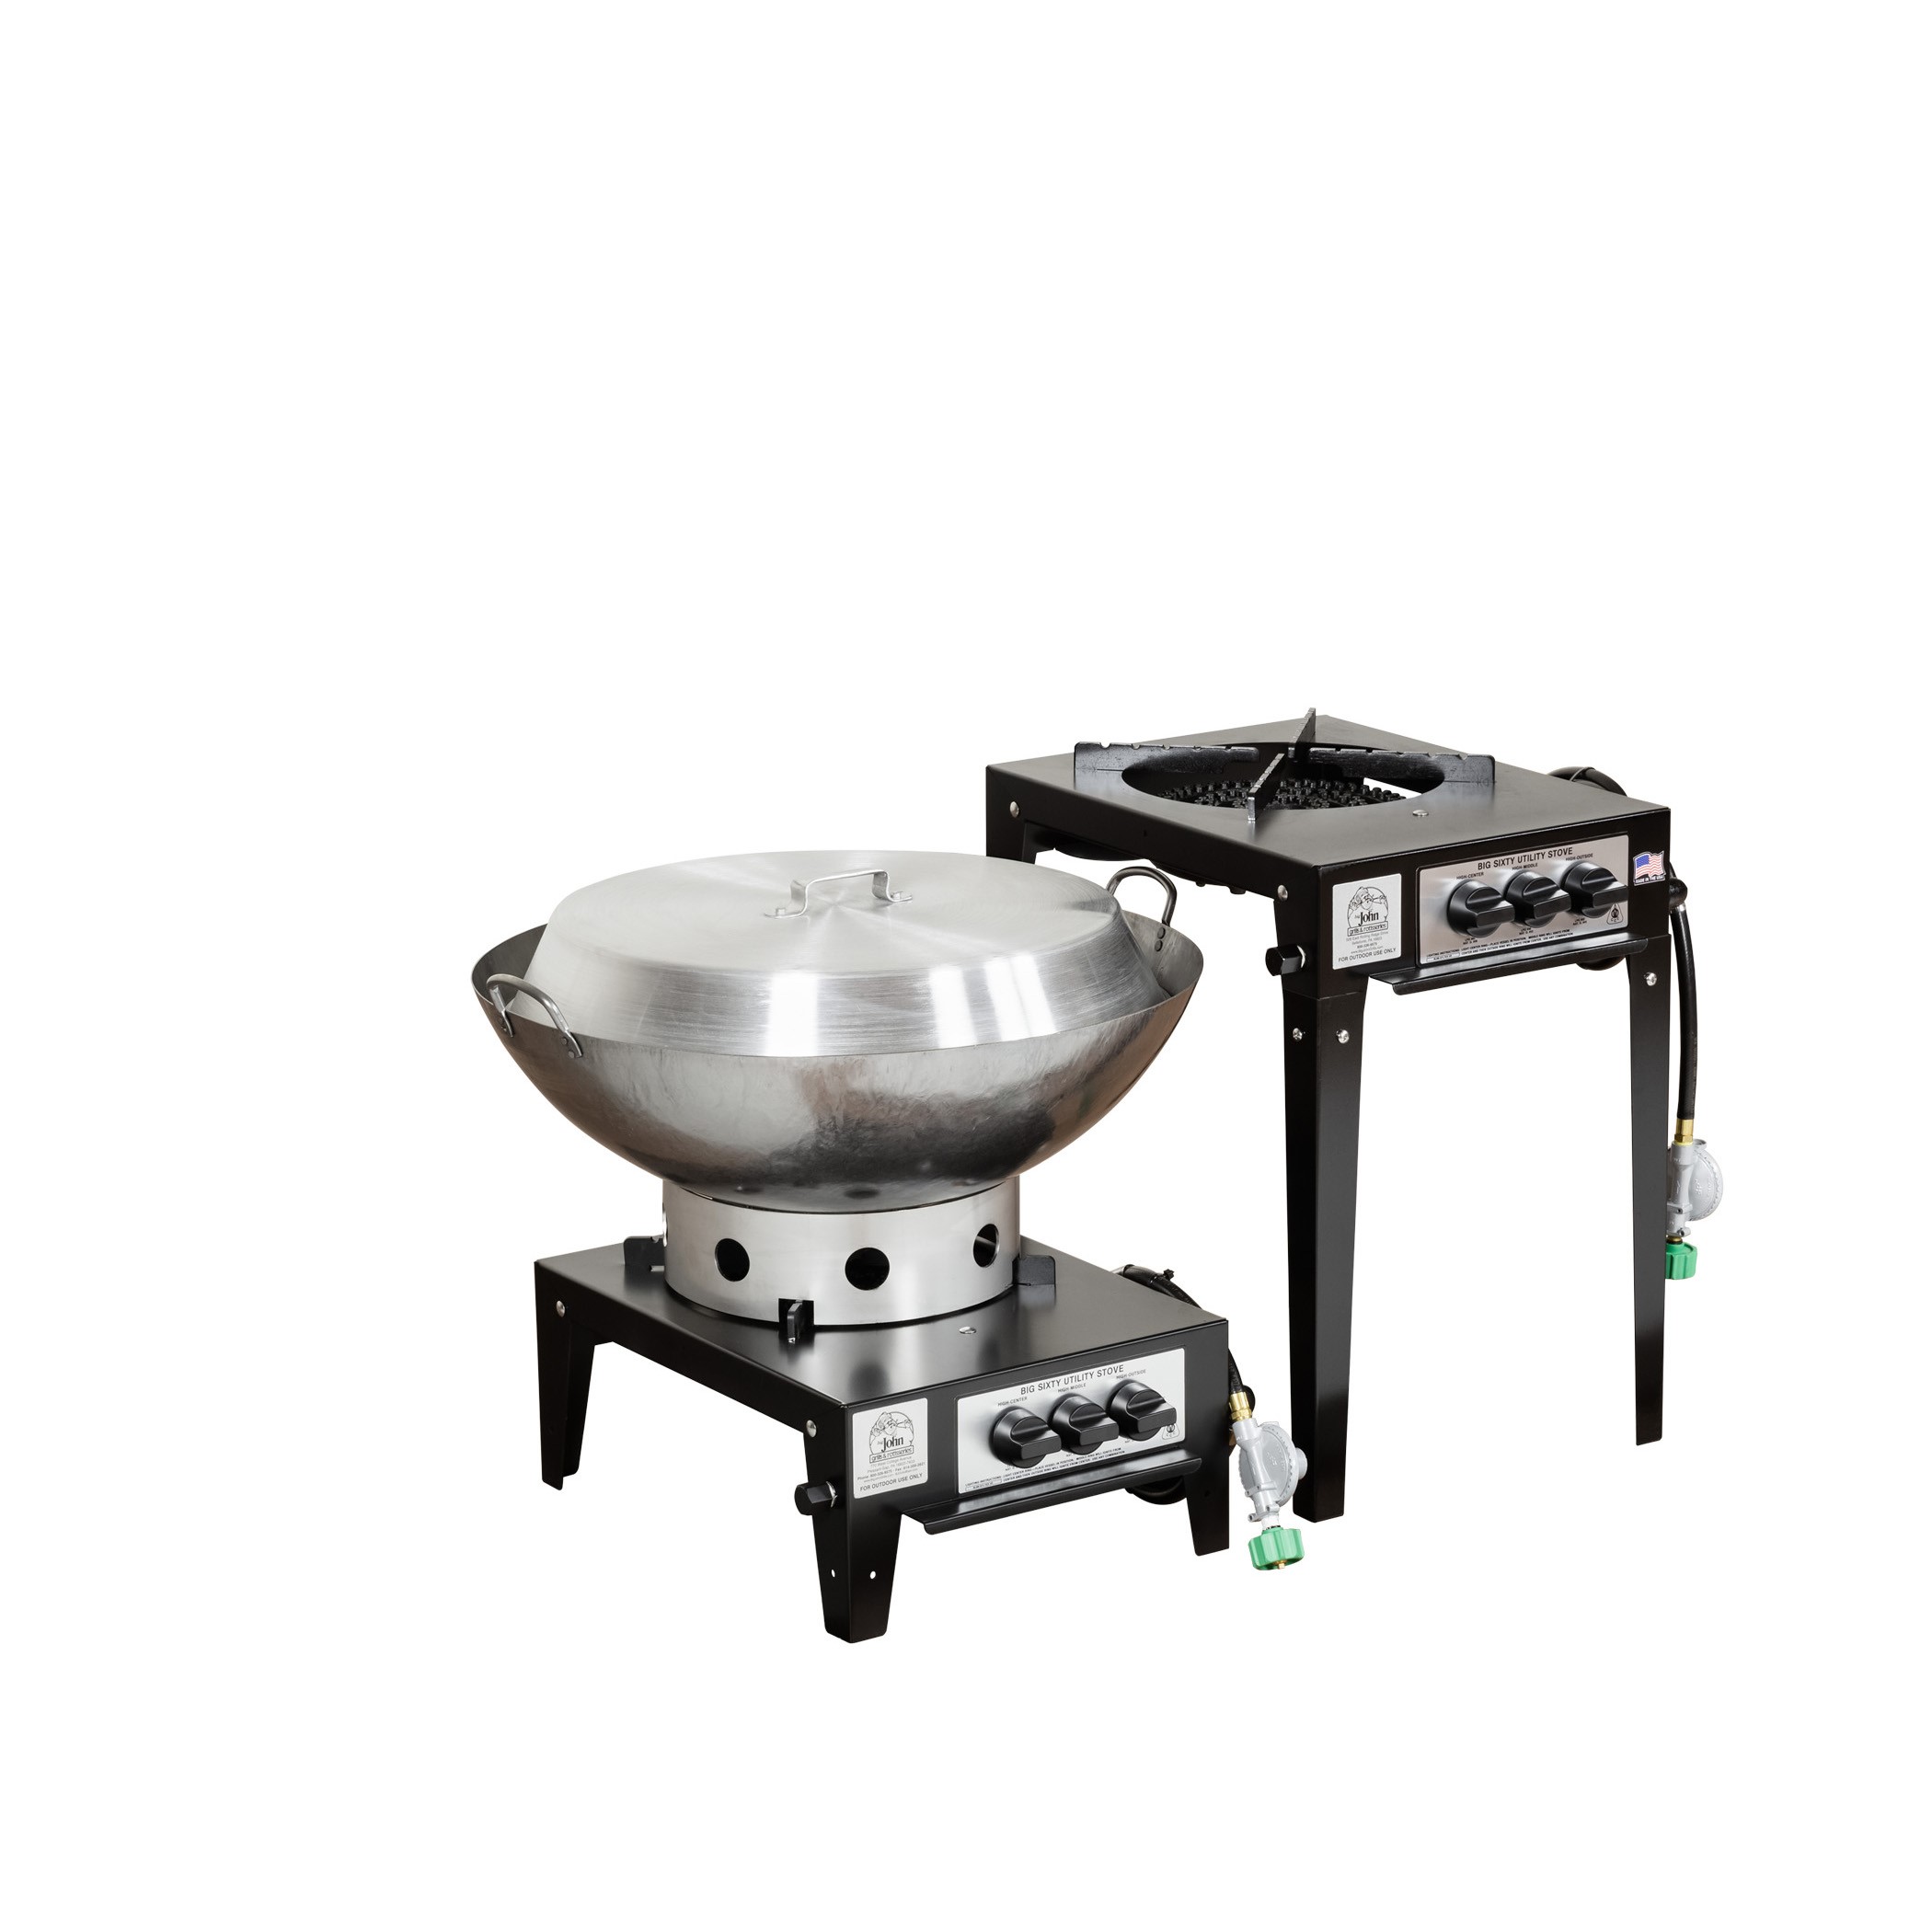 https://www.bigjohngrills.com/image?filename=Products/25%20%20%20%20%20Big%2060%20Utility%20Stove/1/Big%2060%20I%20with%20Wok%20Set.jpg&width=0&height=0